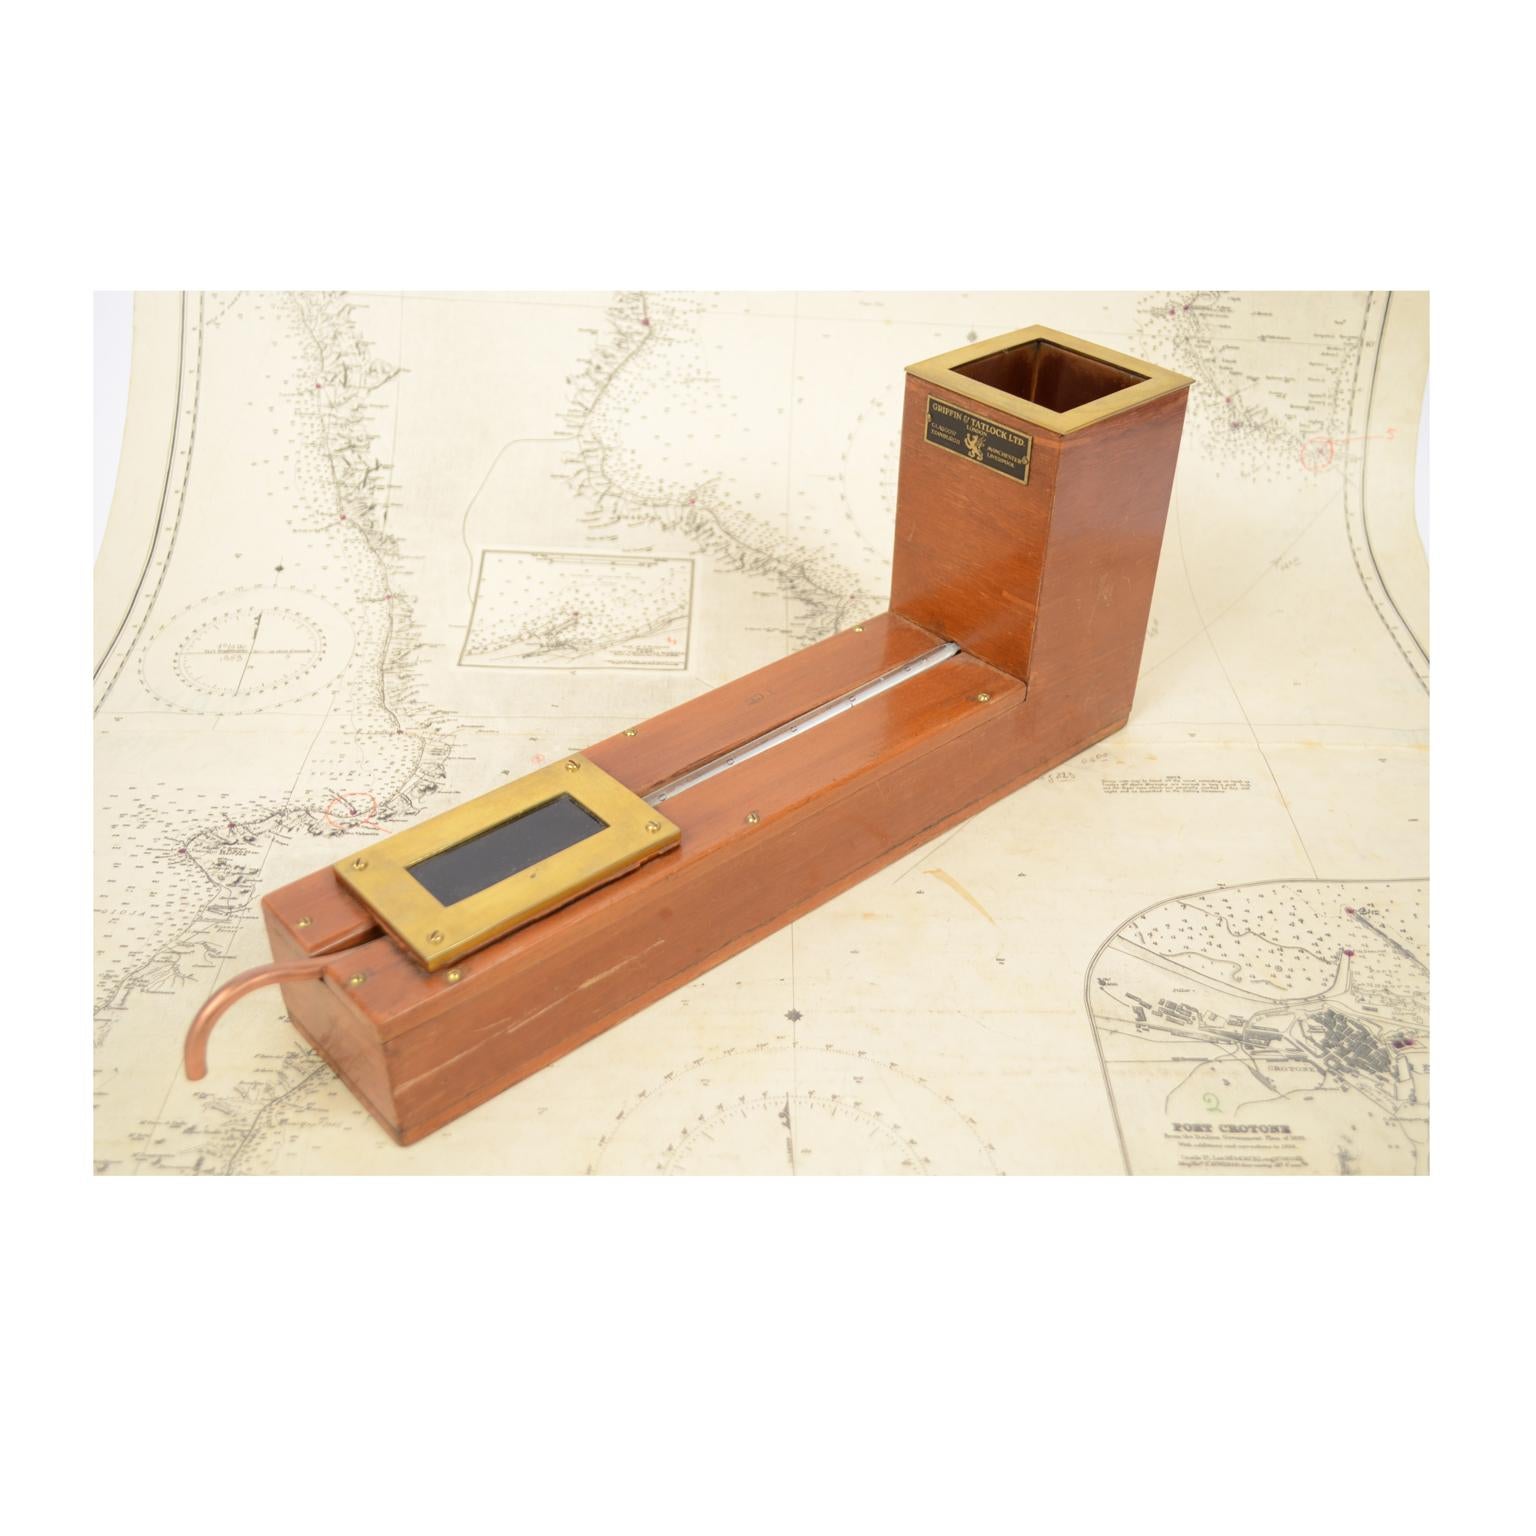 Herschel actinometer, 1930s, wood and brass, signed Griffin & Tatlock ltd London. It is an instrument invented in 1825 by John Herschel and used for the measurement of the solar heat. Very good condition. Measures: 40 x 16 cm.
Shipping is insured by